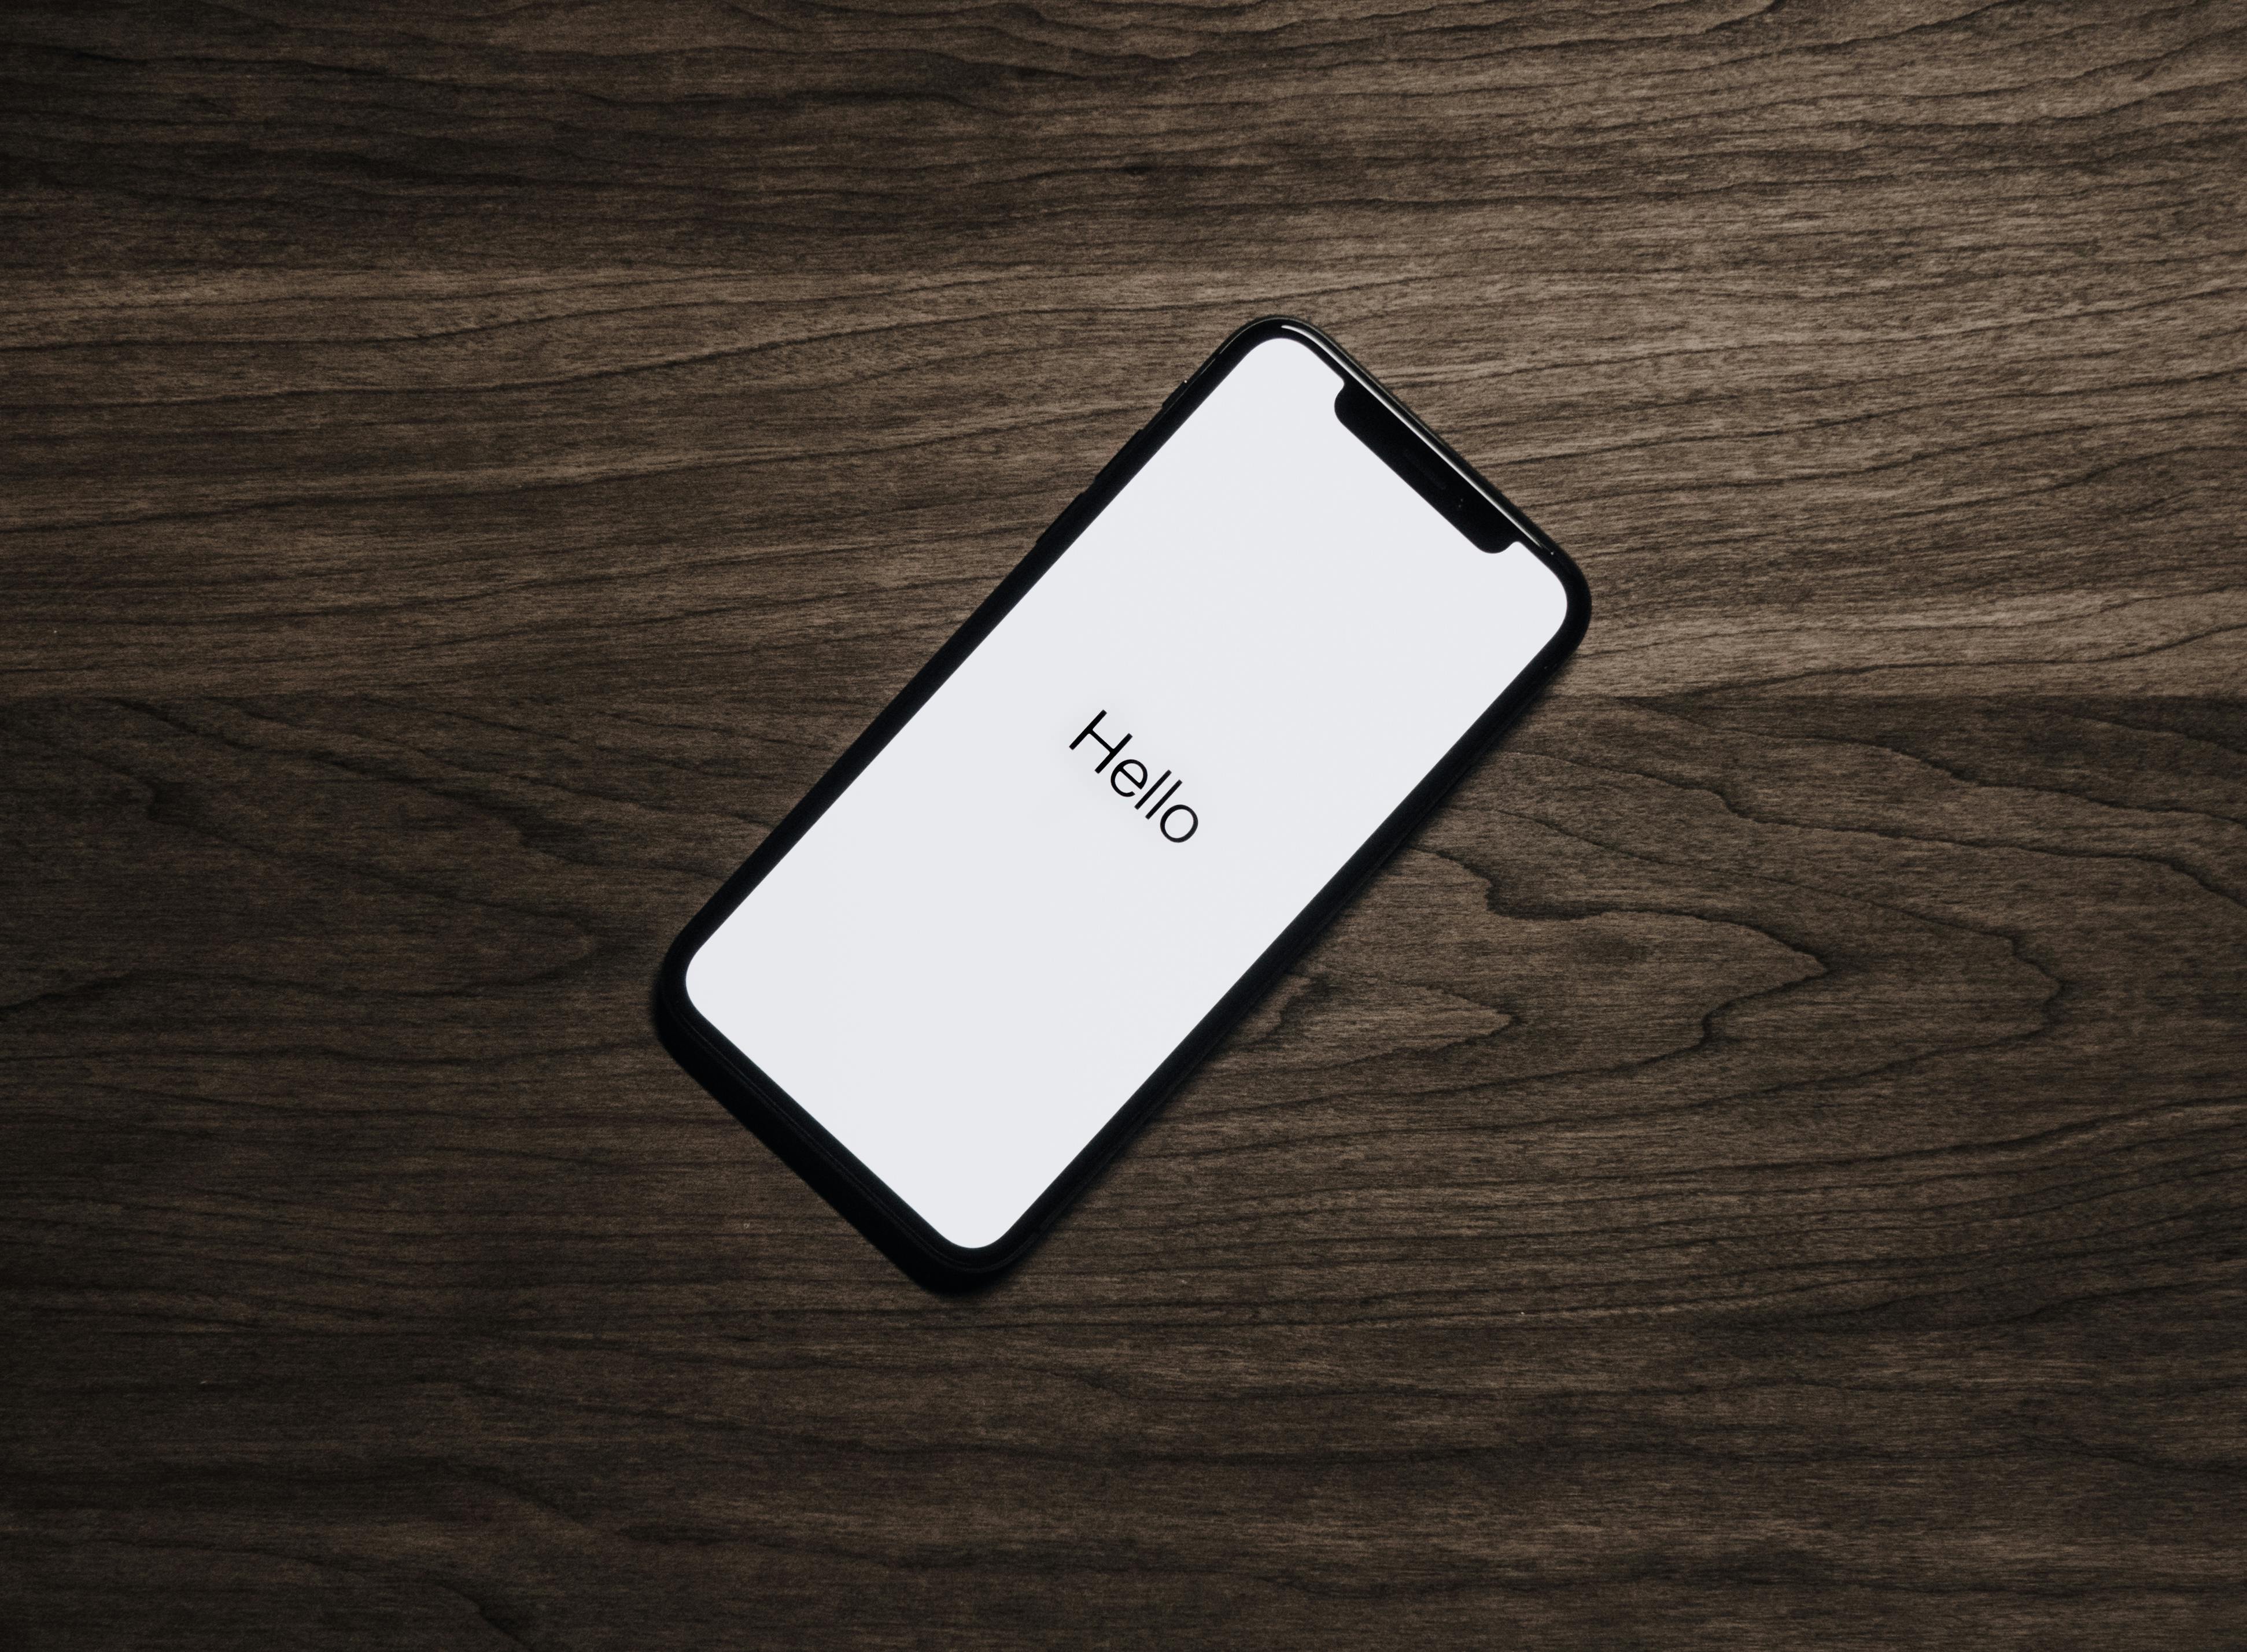 A phone lying on the floor| Source: Pexels